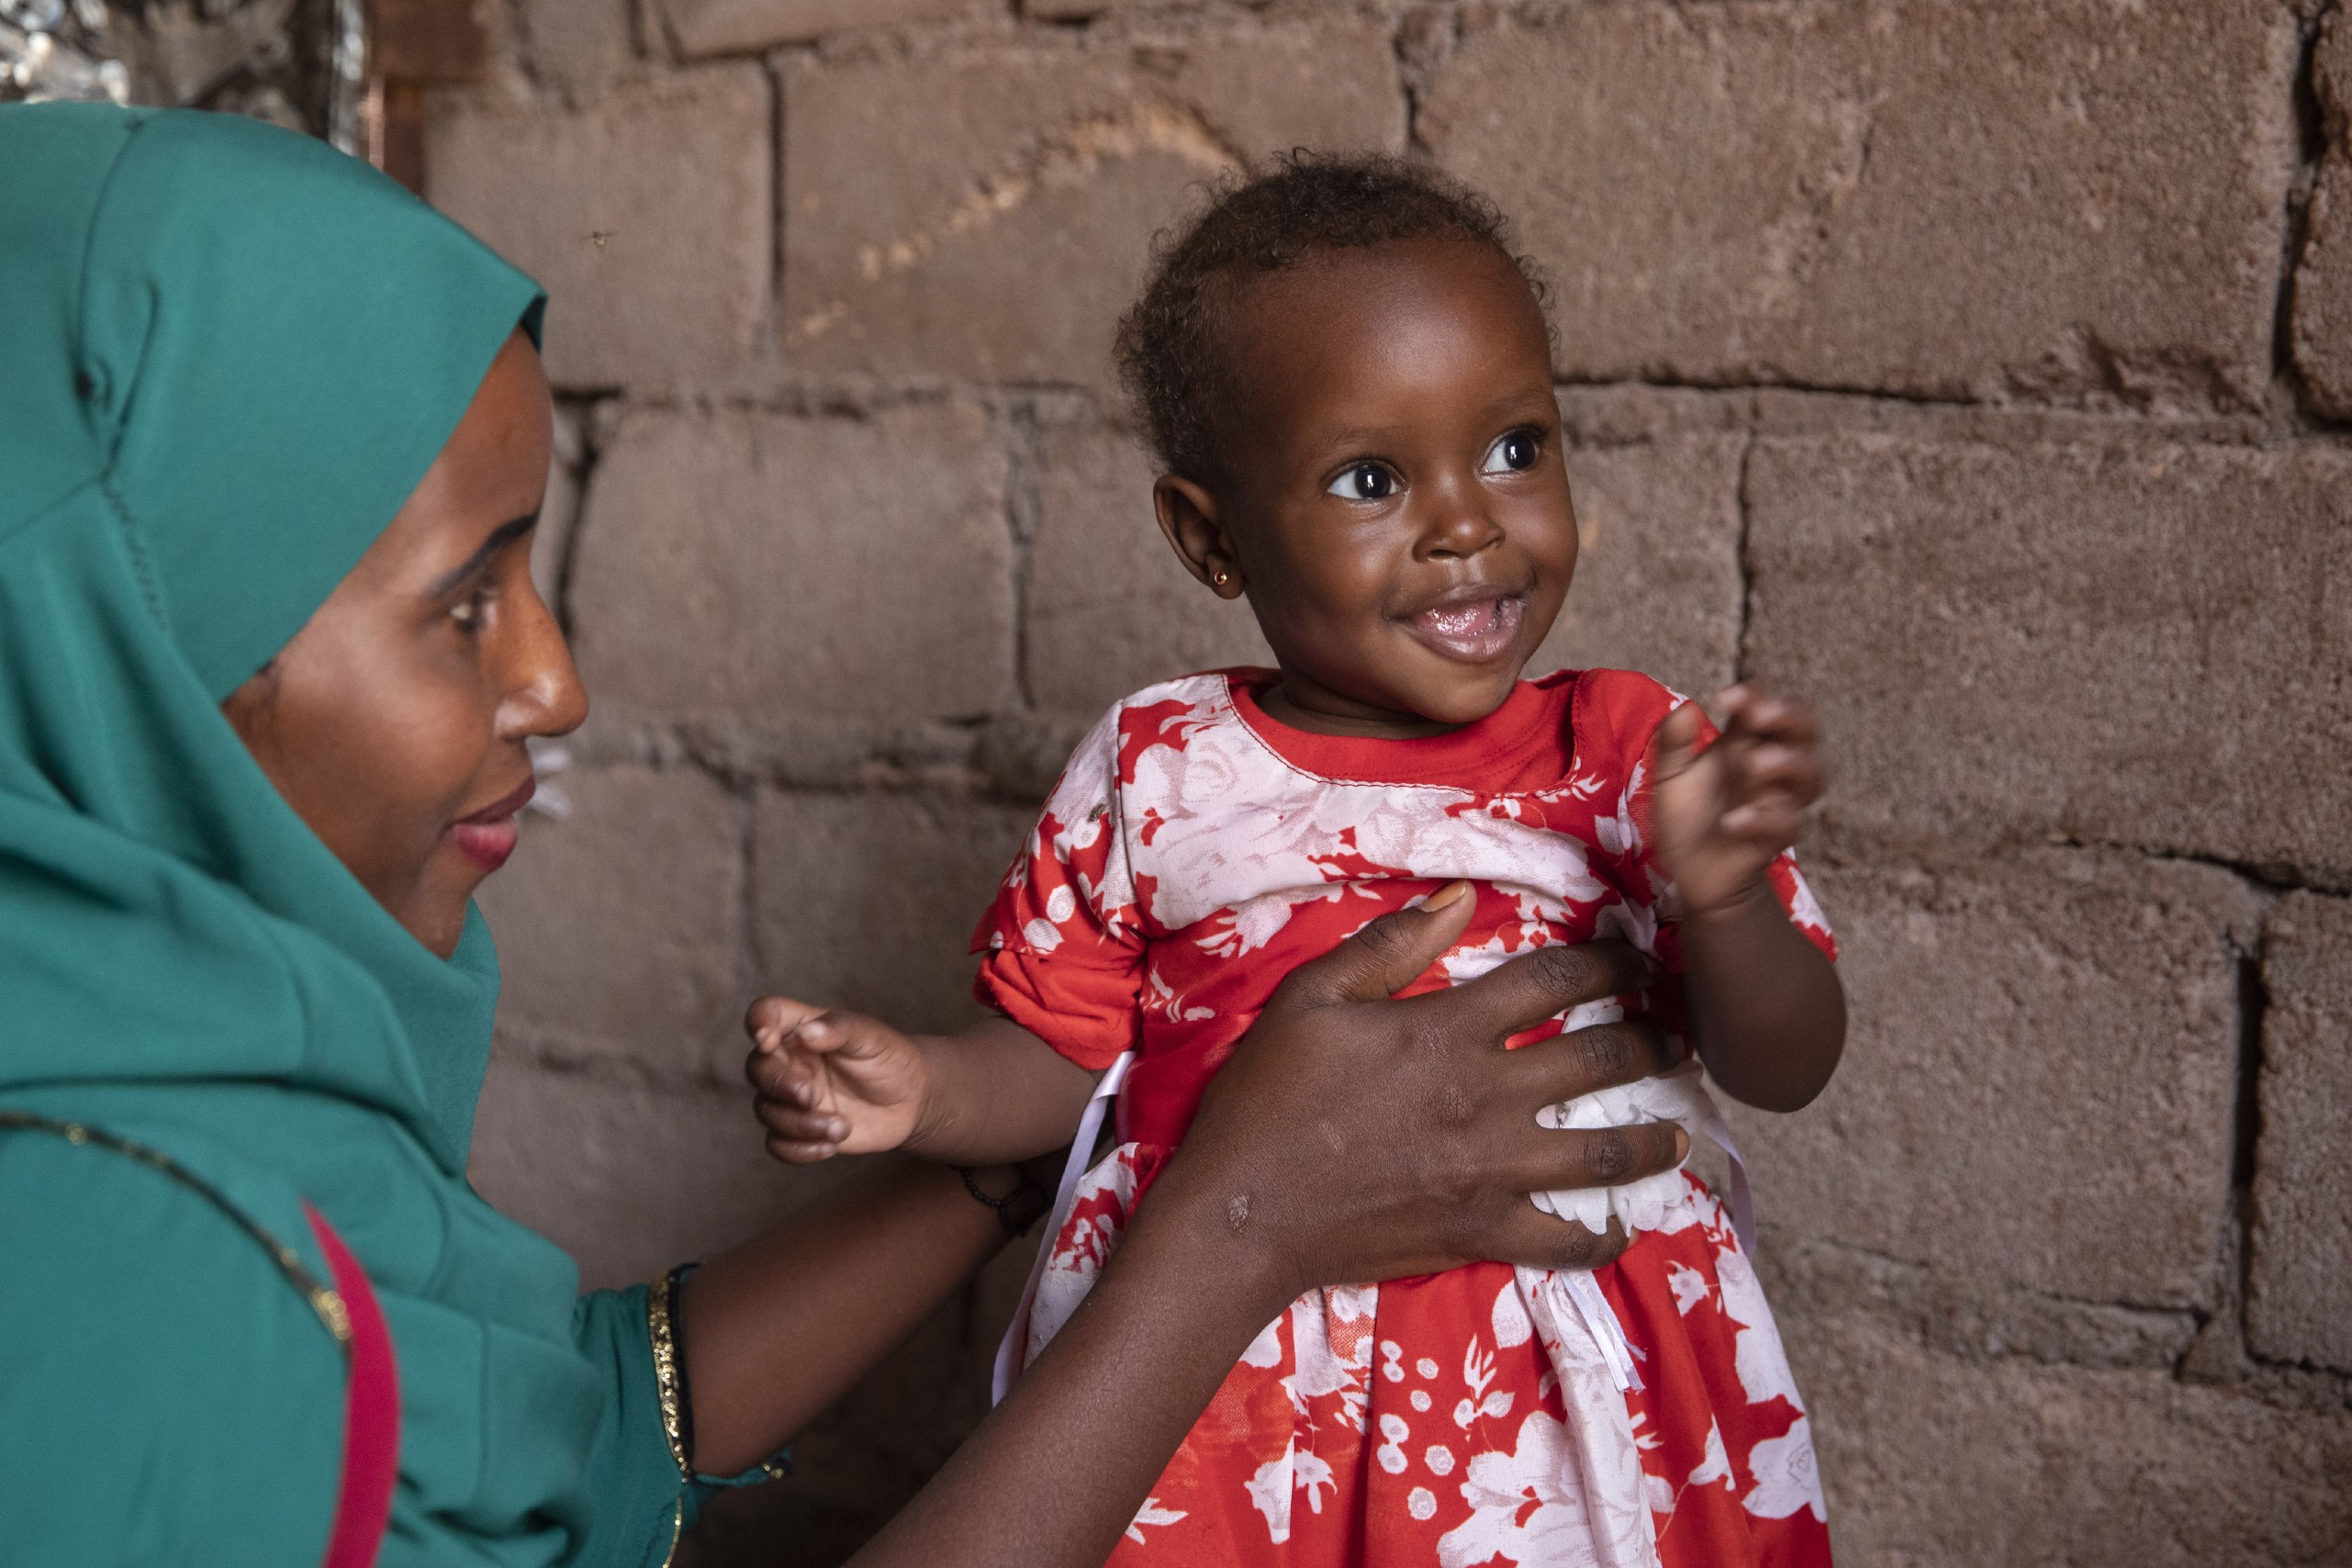 Fatima, 9 months with her mother in Somalia